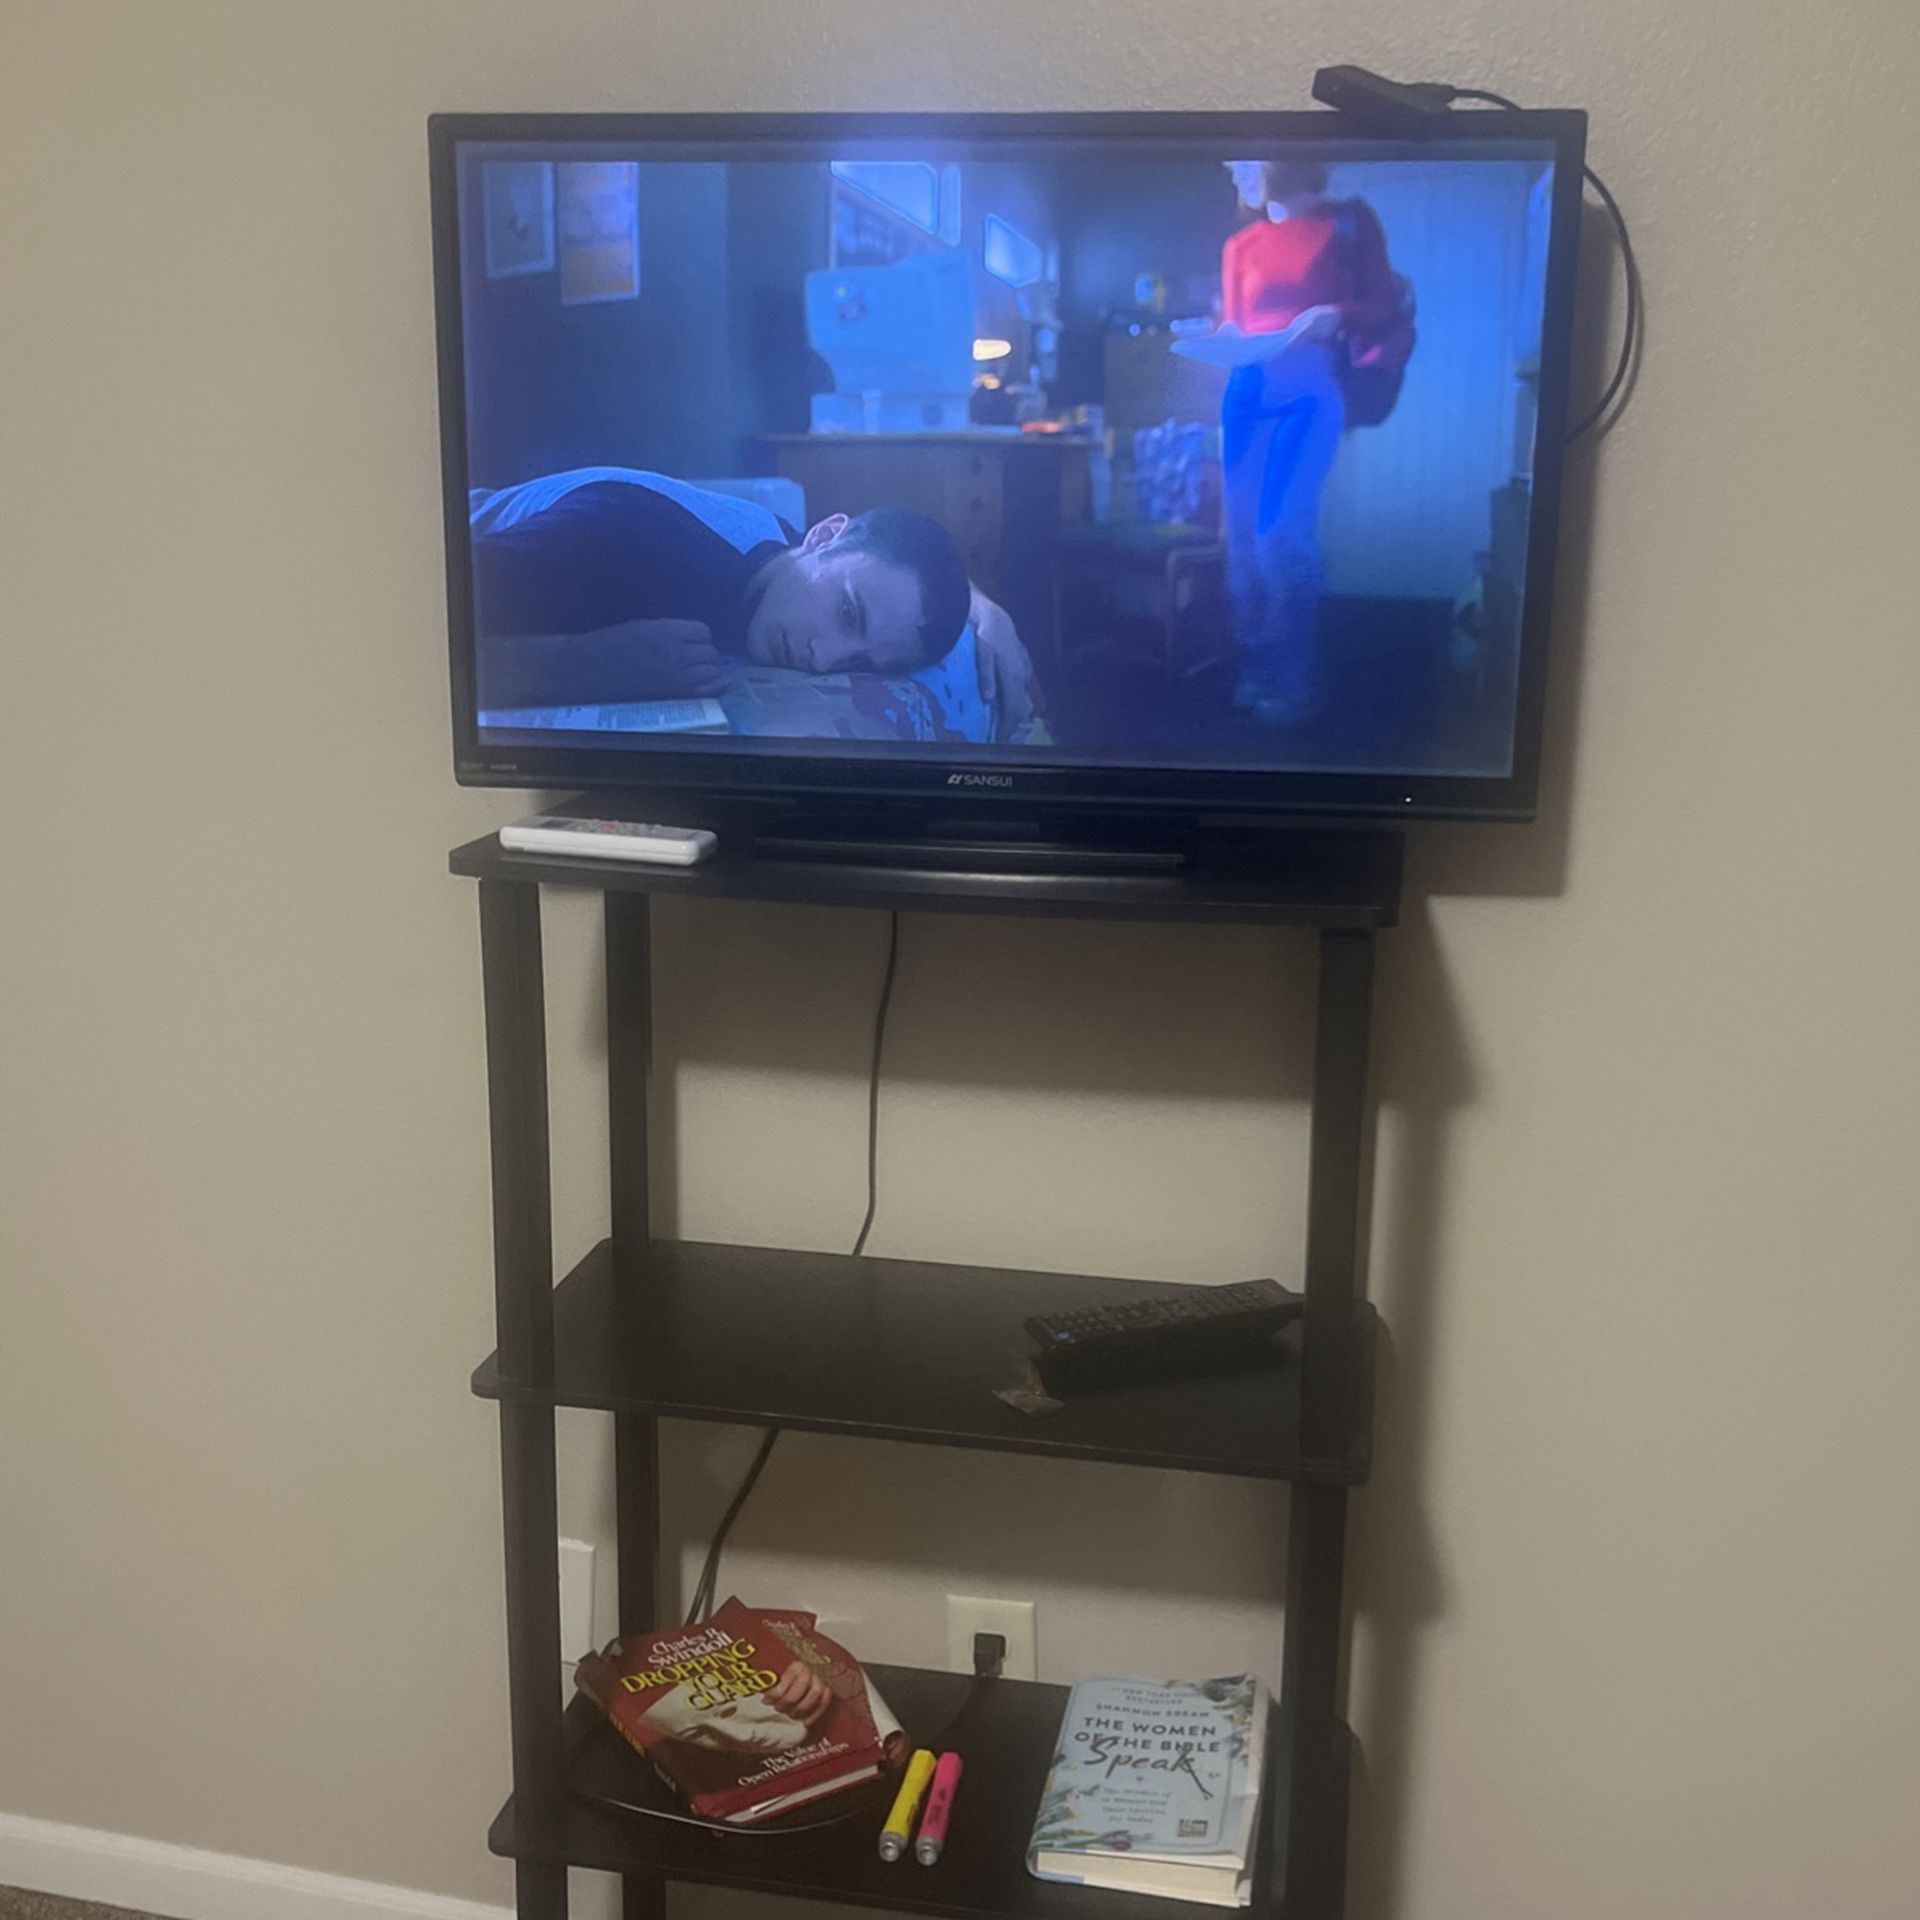 40 In Tv With Stand 